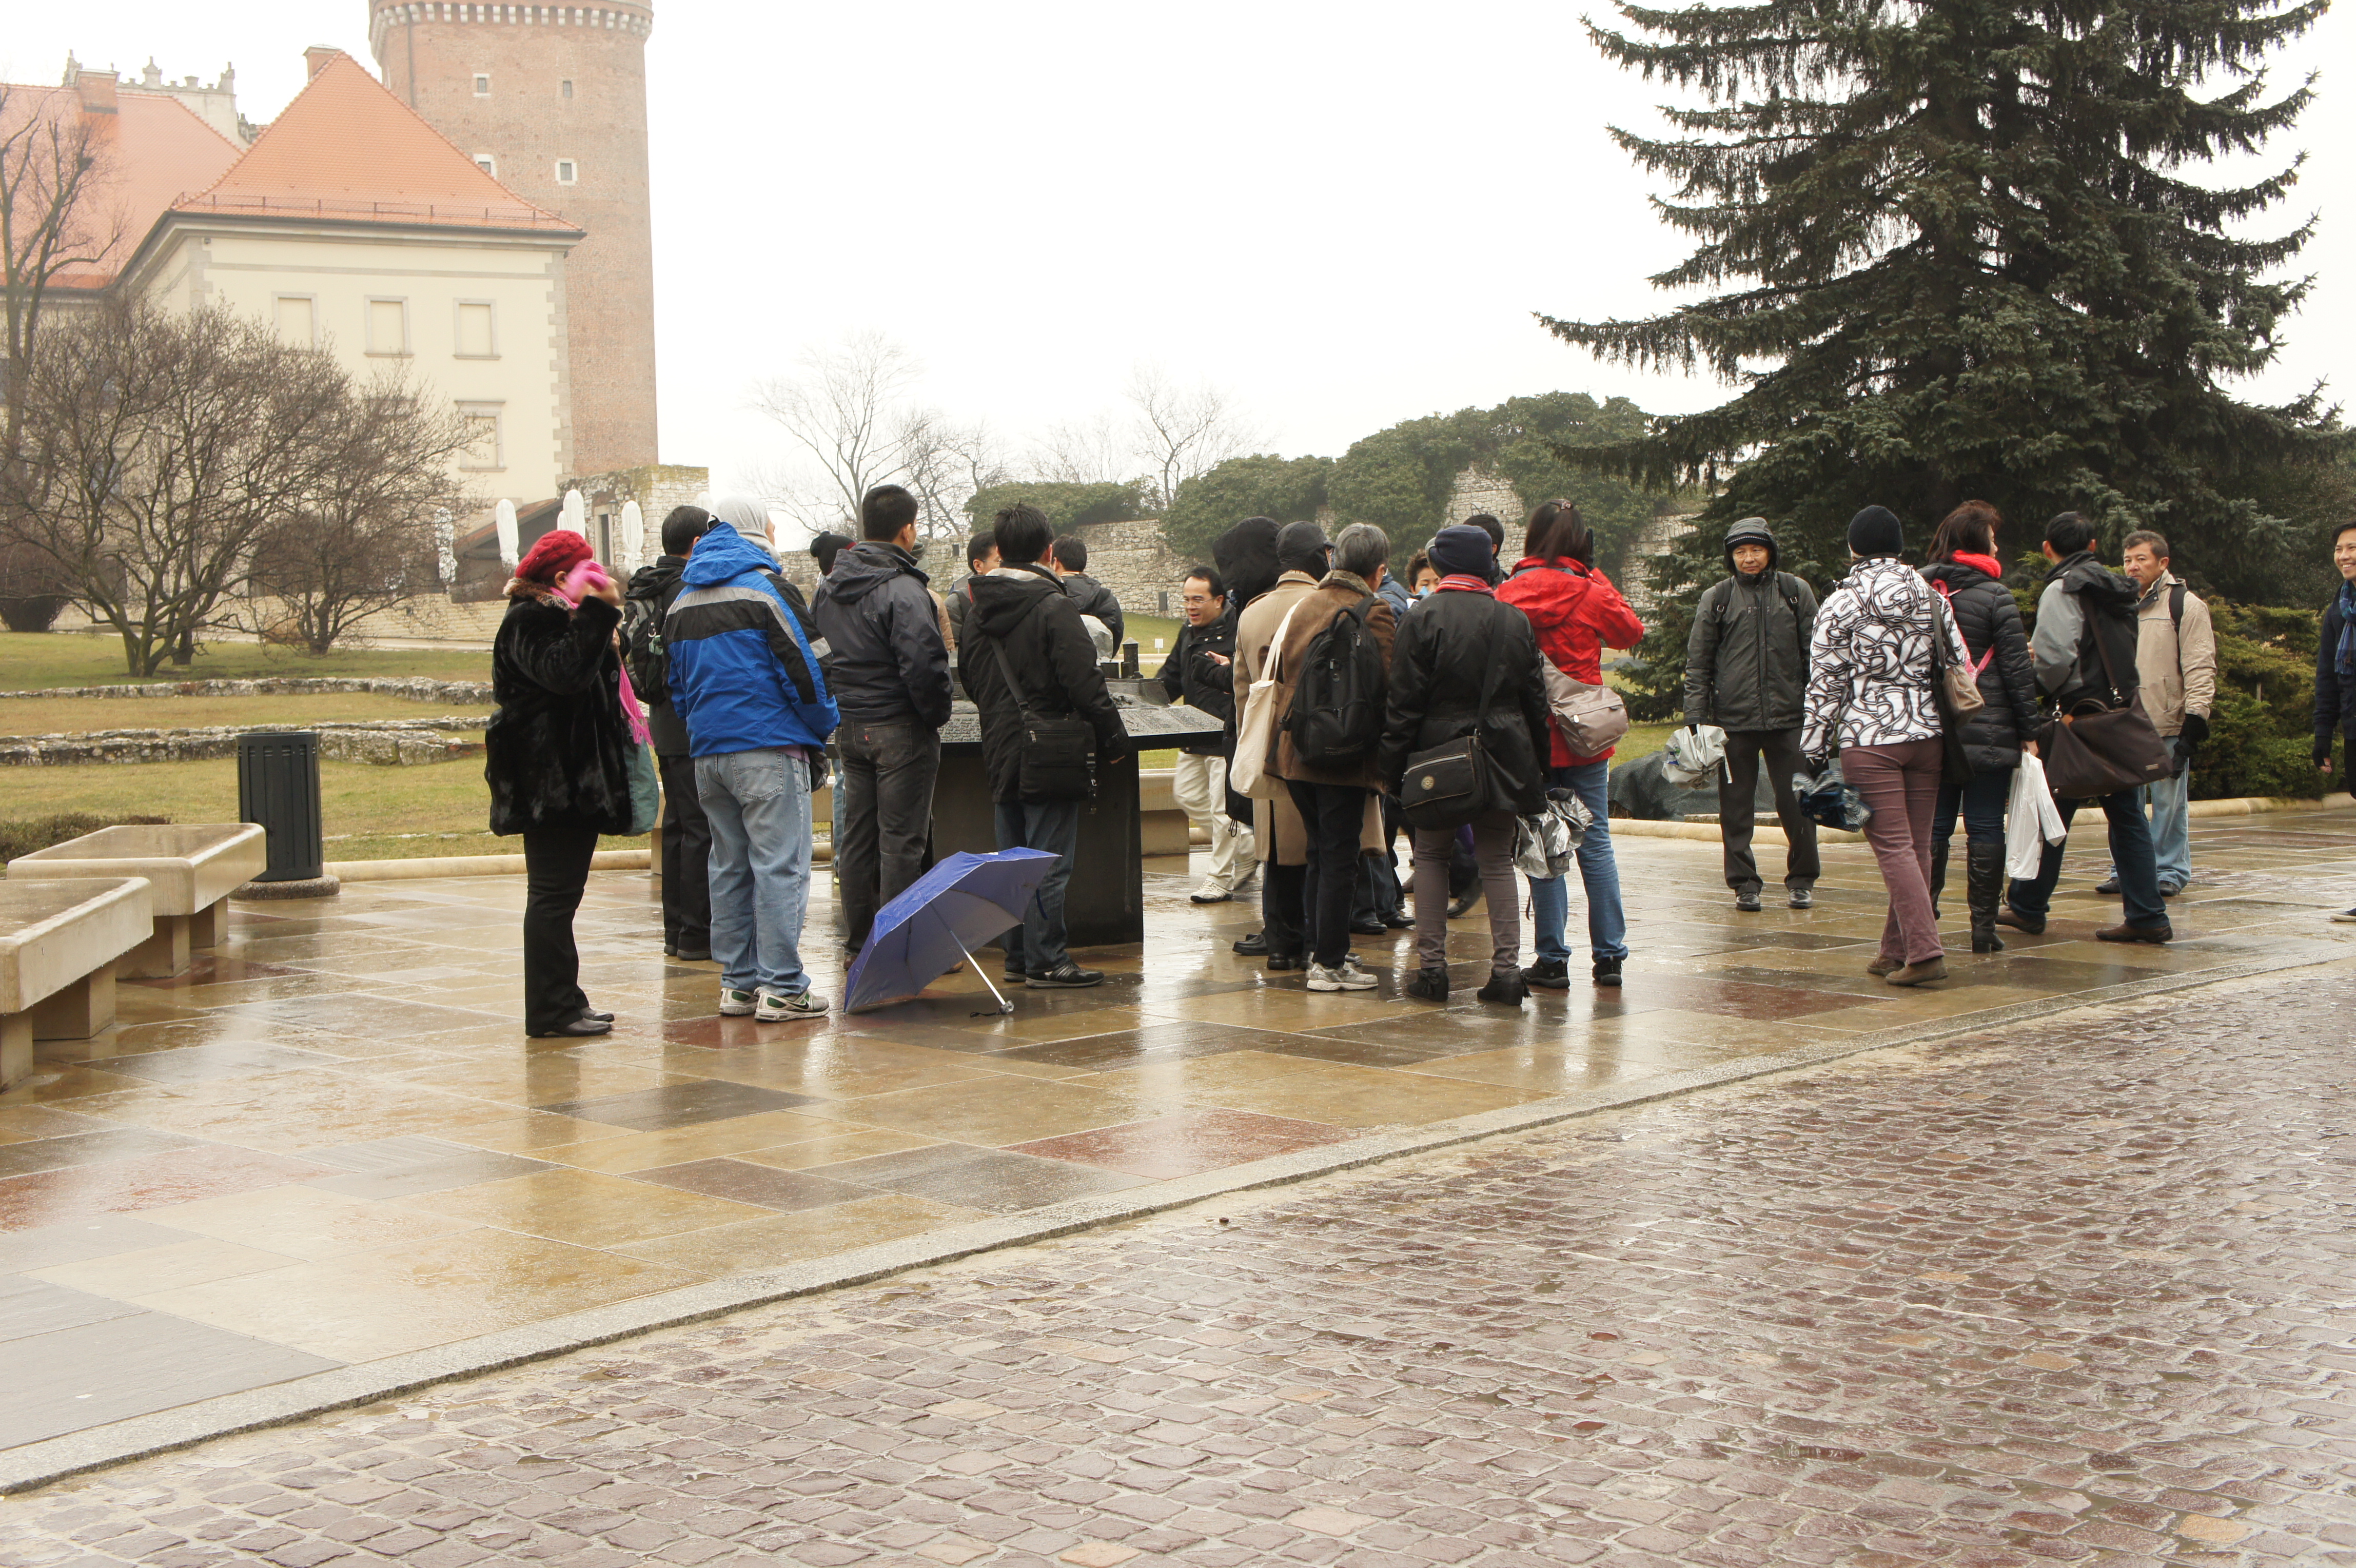 First Thai tourists we have met so far. We met them outside the Wawel cathedral